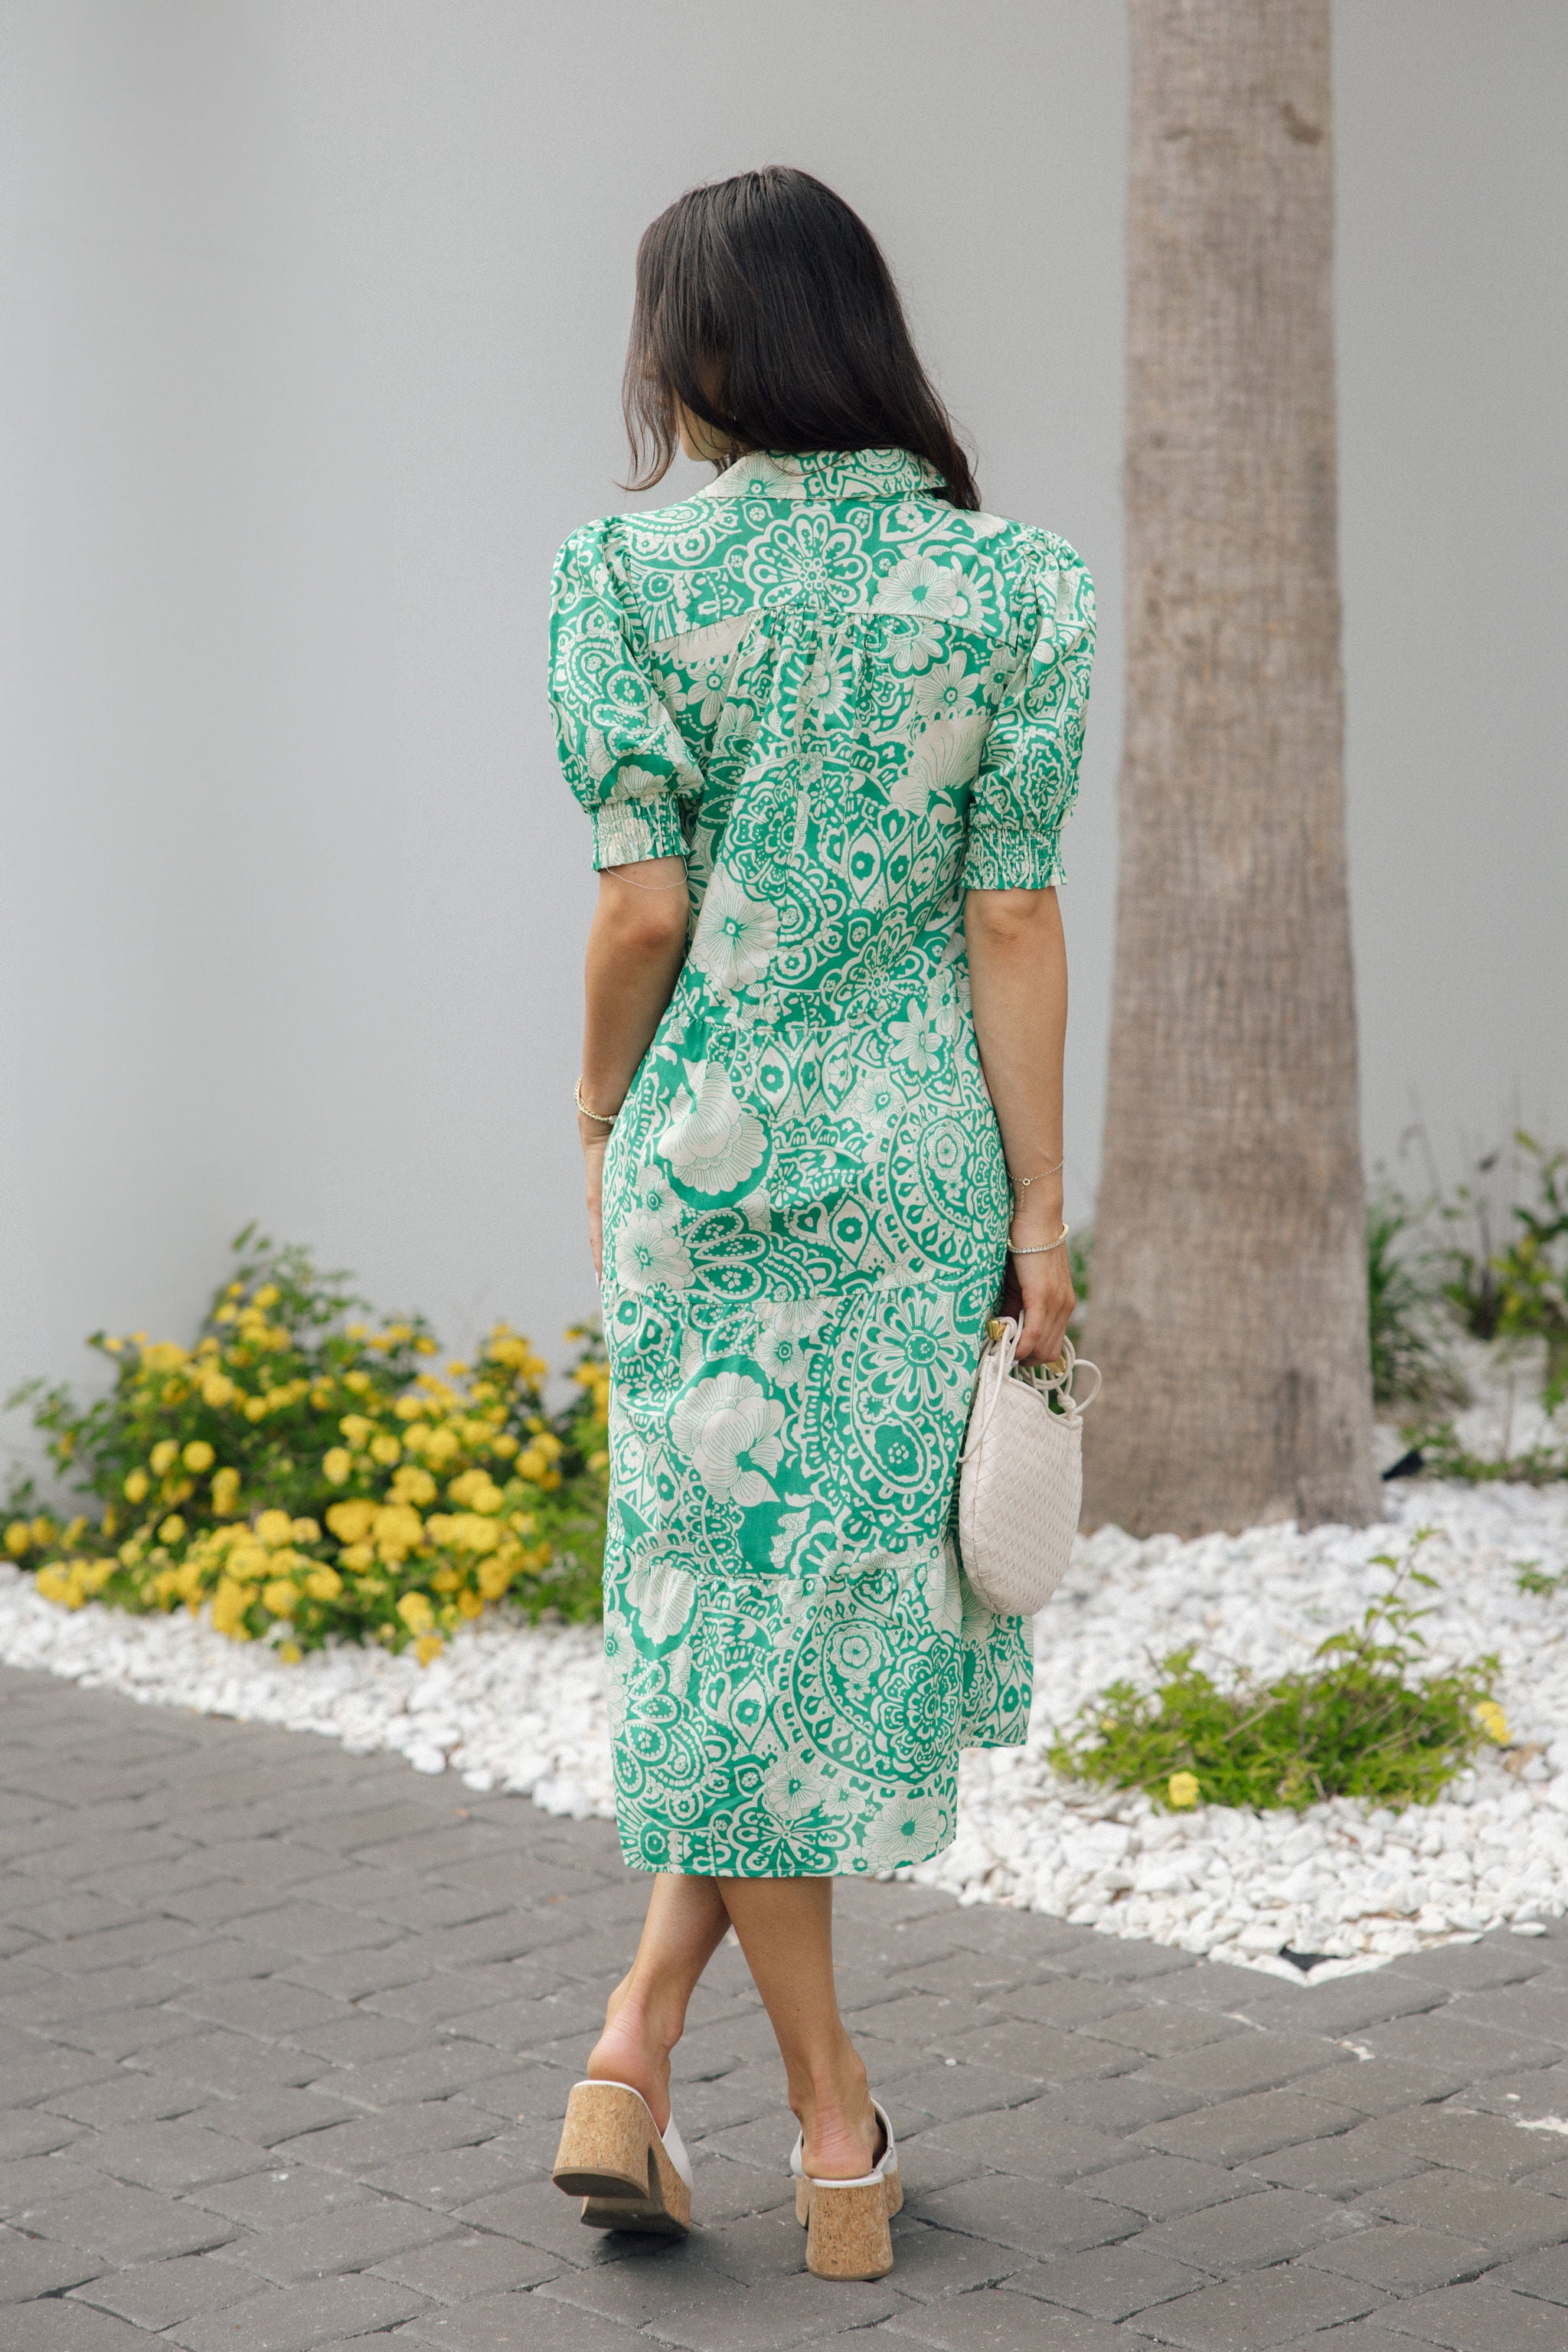 Full body back view of female model wearing the Celeste Green & Cream Floral Paisley Midi Dress which features Green and Cream Floral Paisley Pattern, Midi Length, Tiered Body, V-Neckline with Collar and Short Puff Sleeves